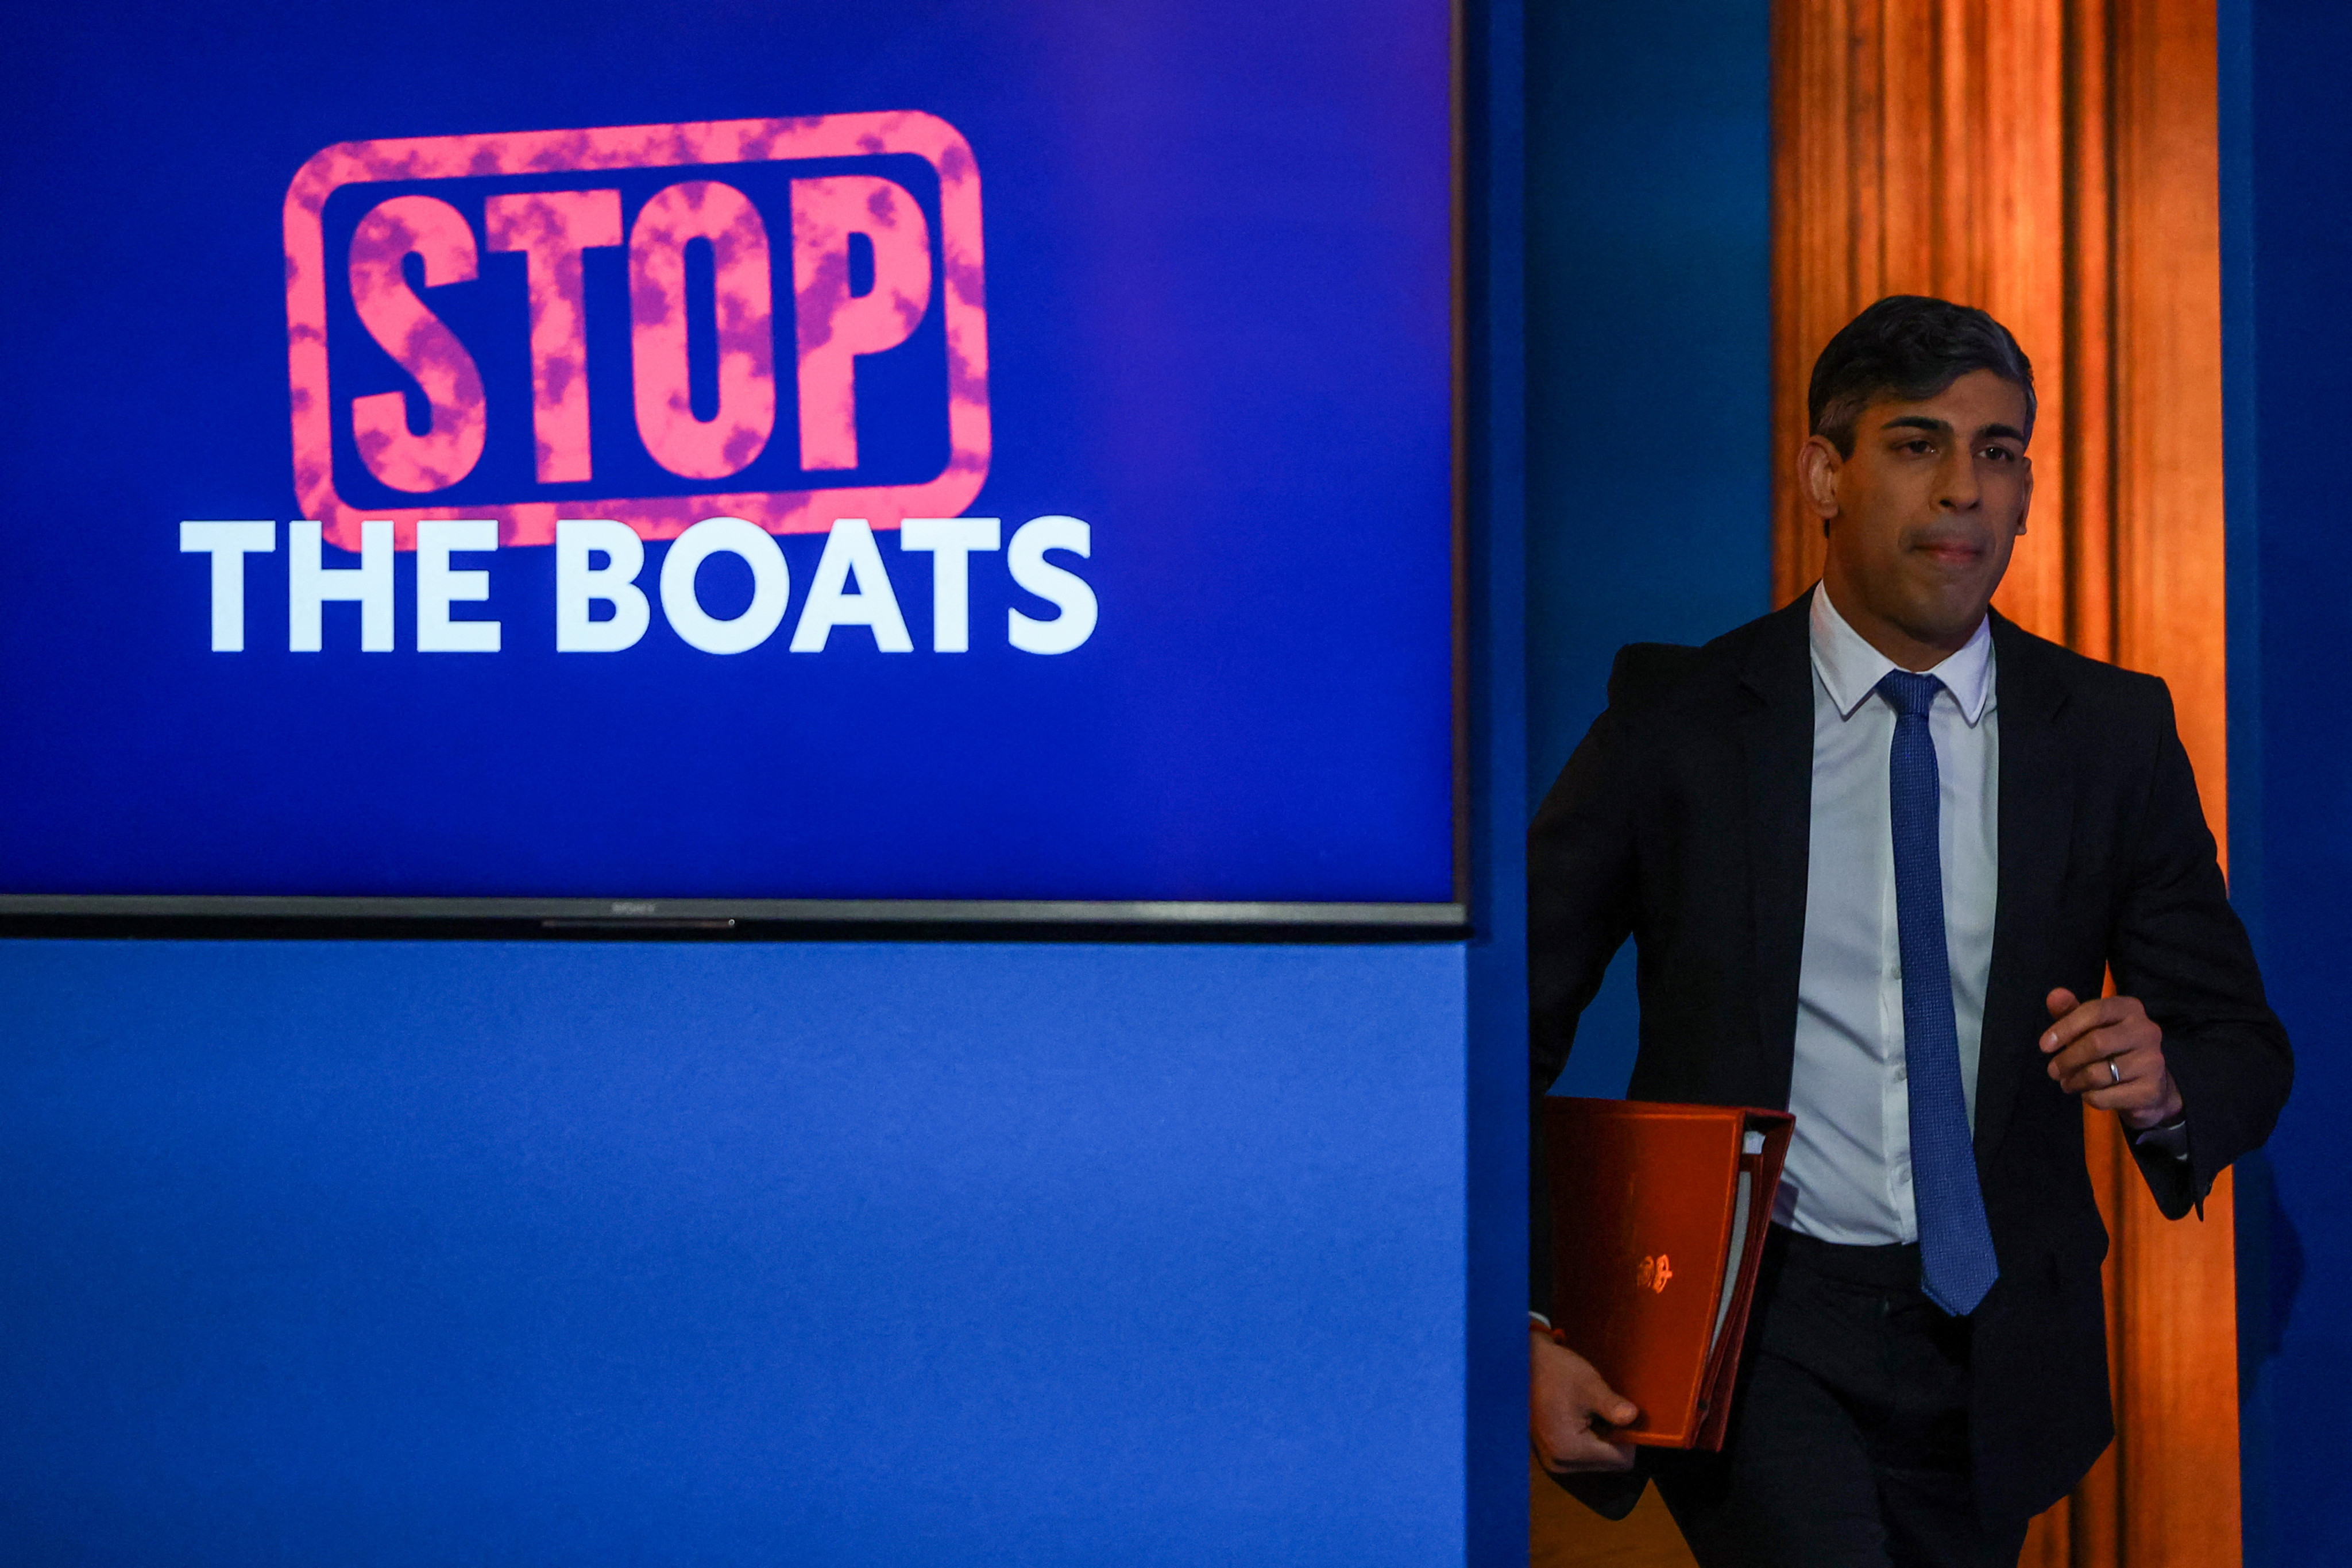 British Prime Minister Rishi Sunak arrives for a press conference in Downing Street. Sunak’s ruling Conservative Party plans to send some asylum seekers to Rwanda as a deterrent to persuade migrants that it is not worth the risk of crossing the English Channel on leaky inflatable boats. Photo: dpa